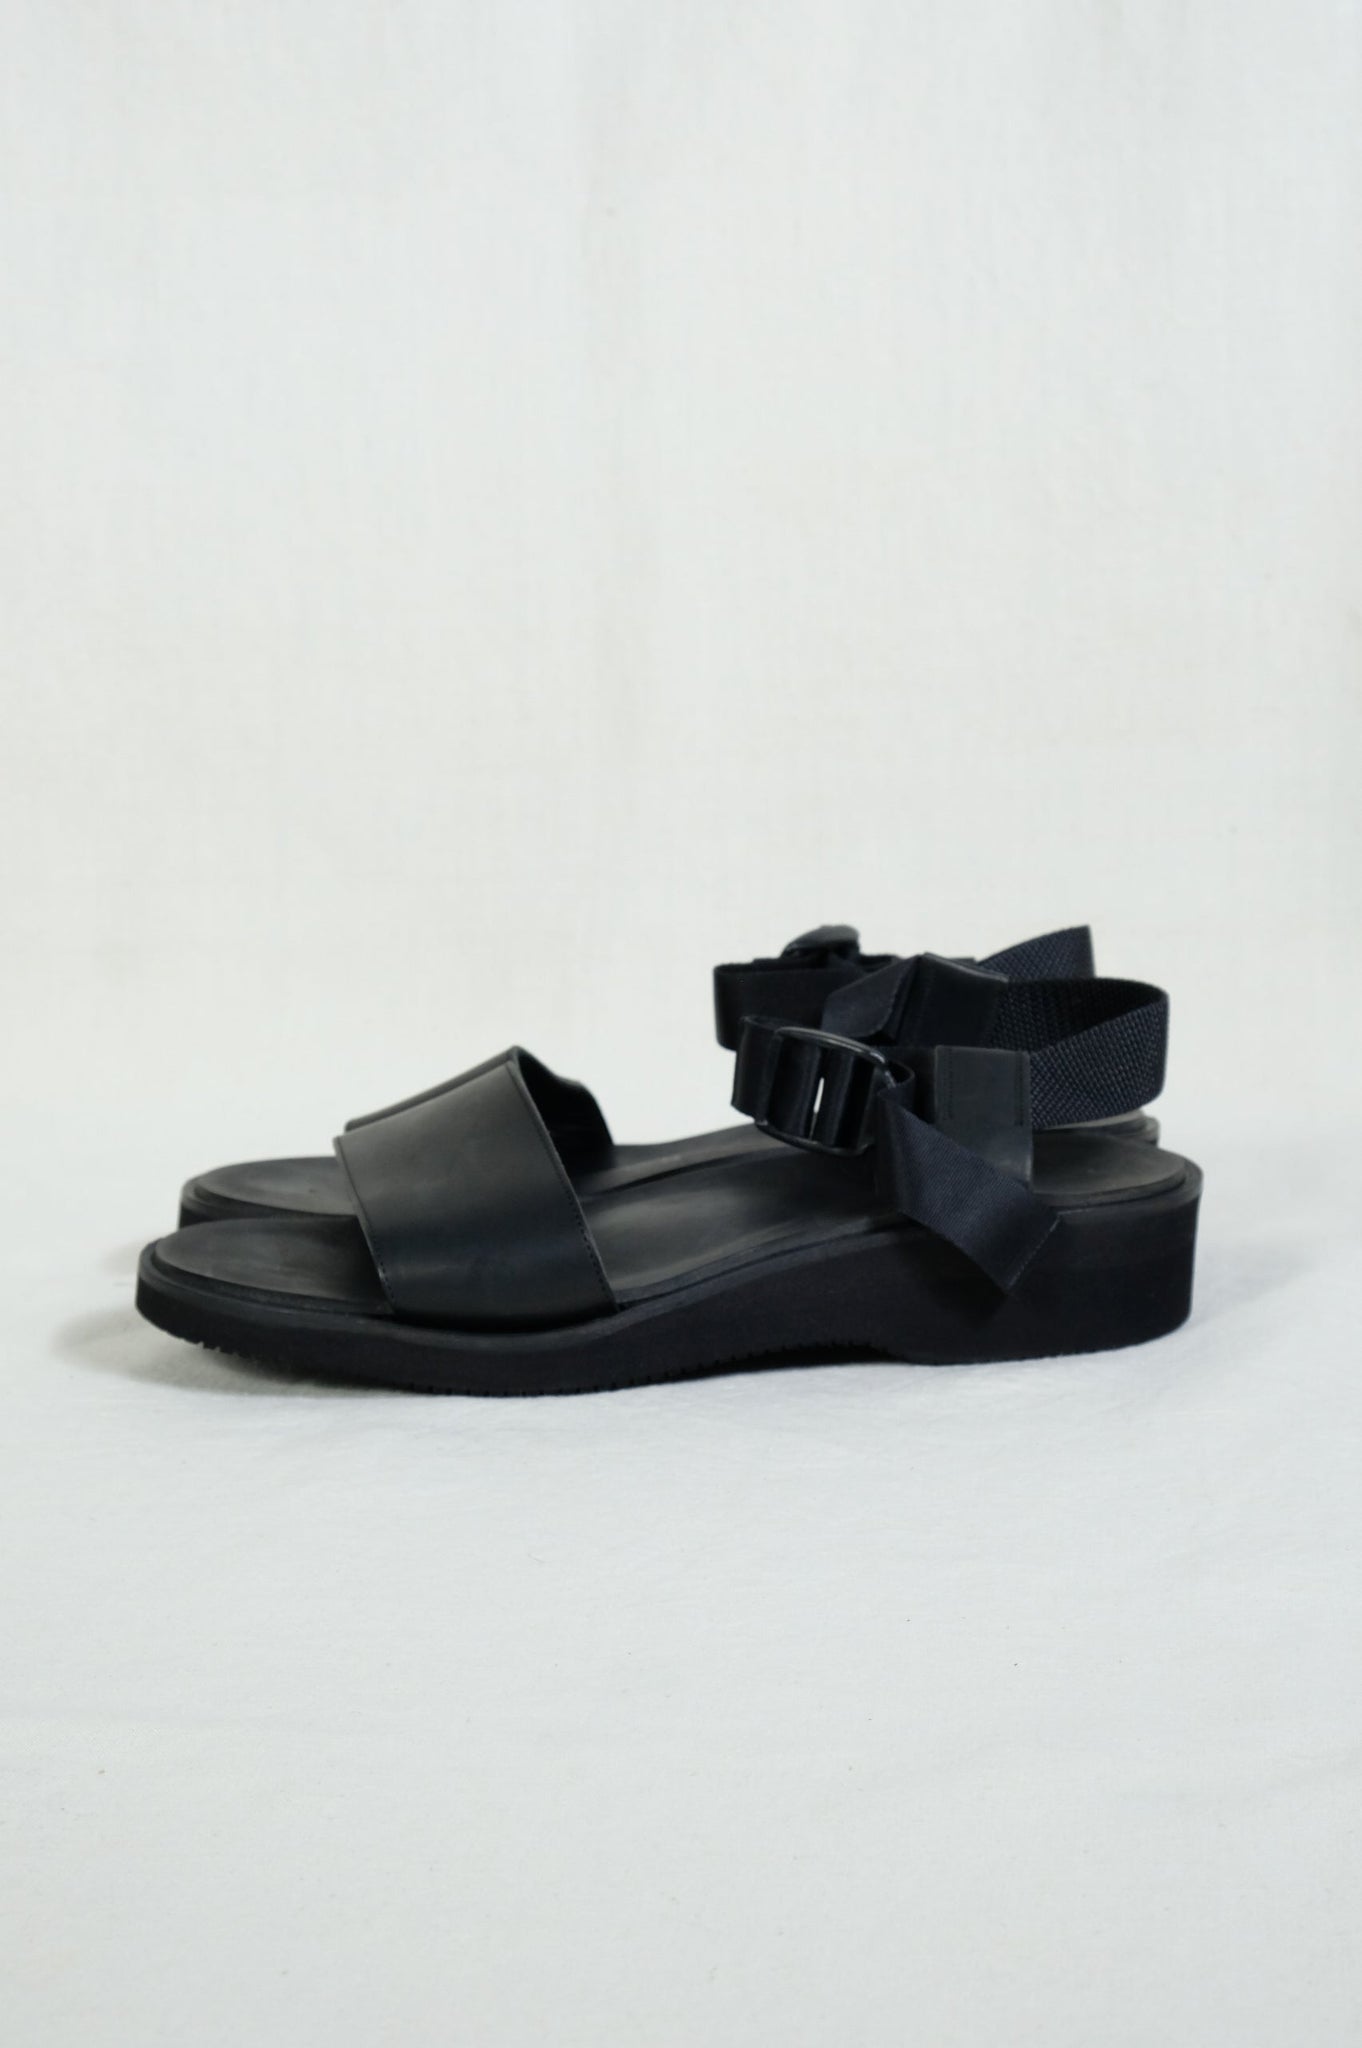 FOOTWORKS "LEATHER SANDAL / SMOOTH LEATHER"